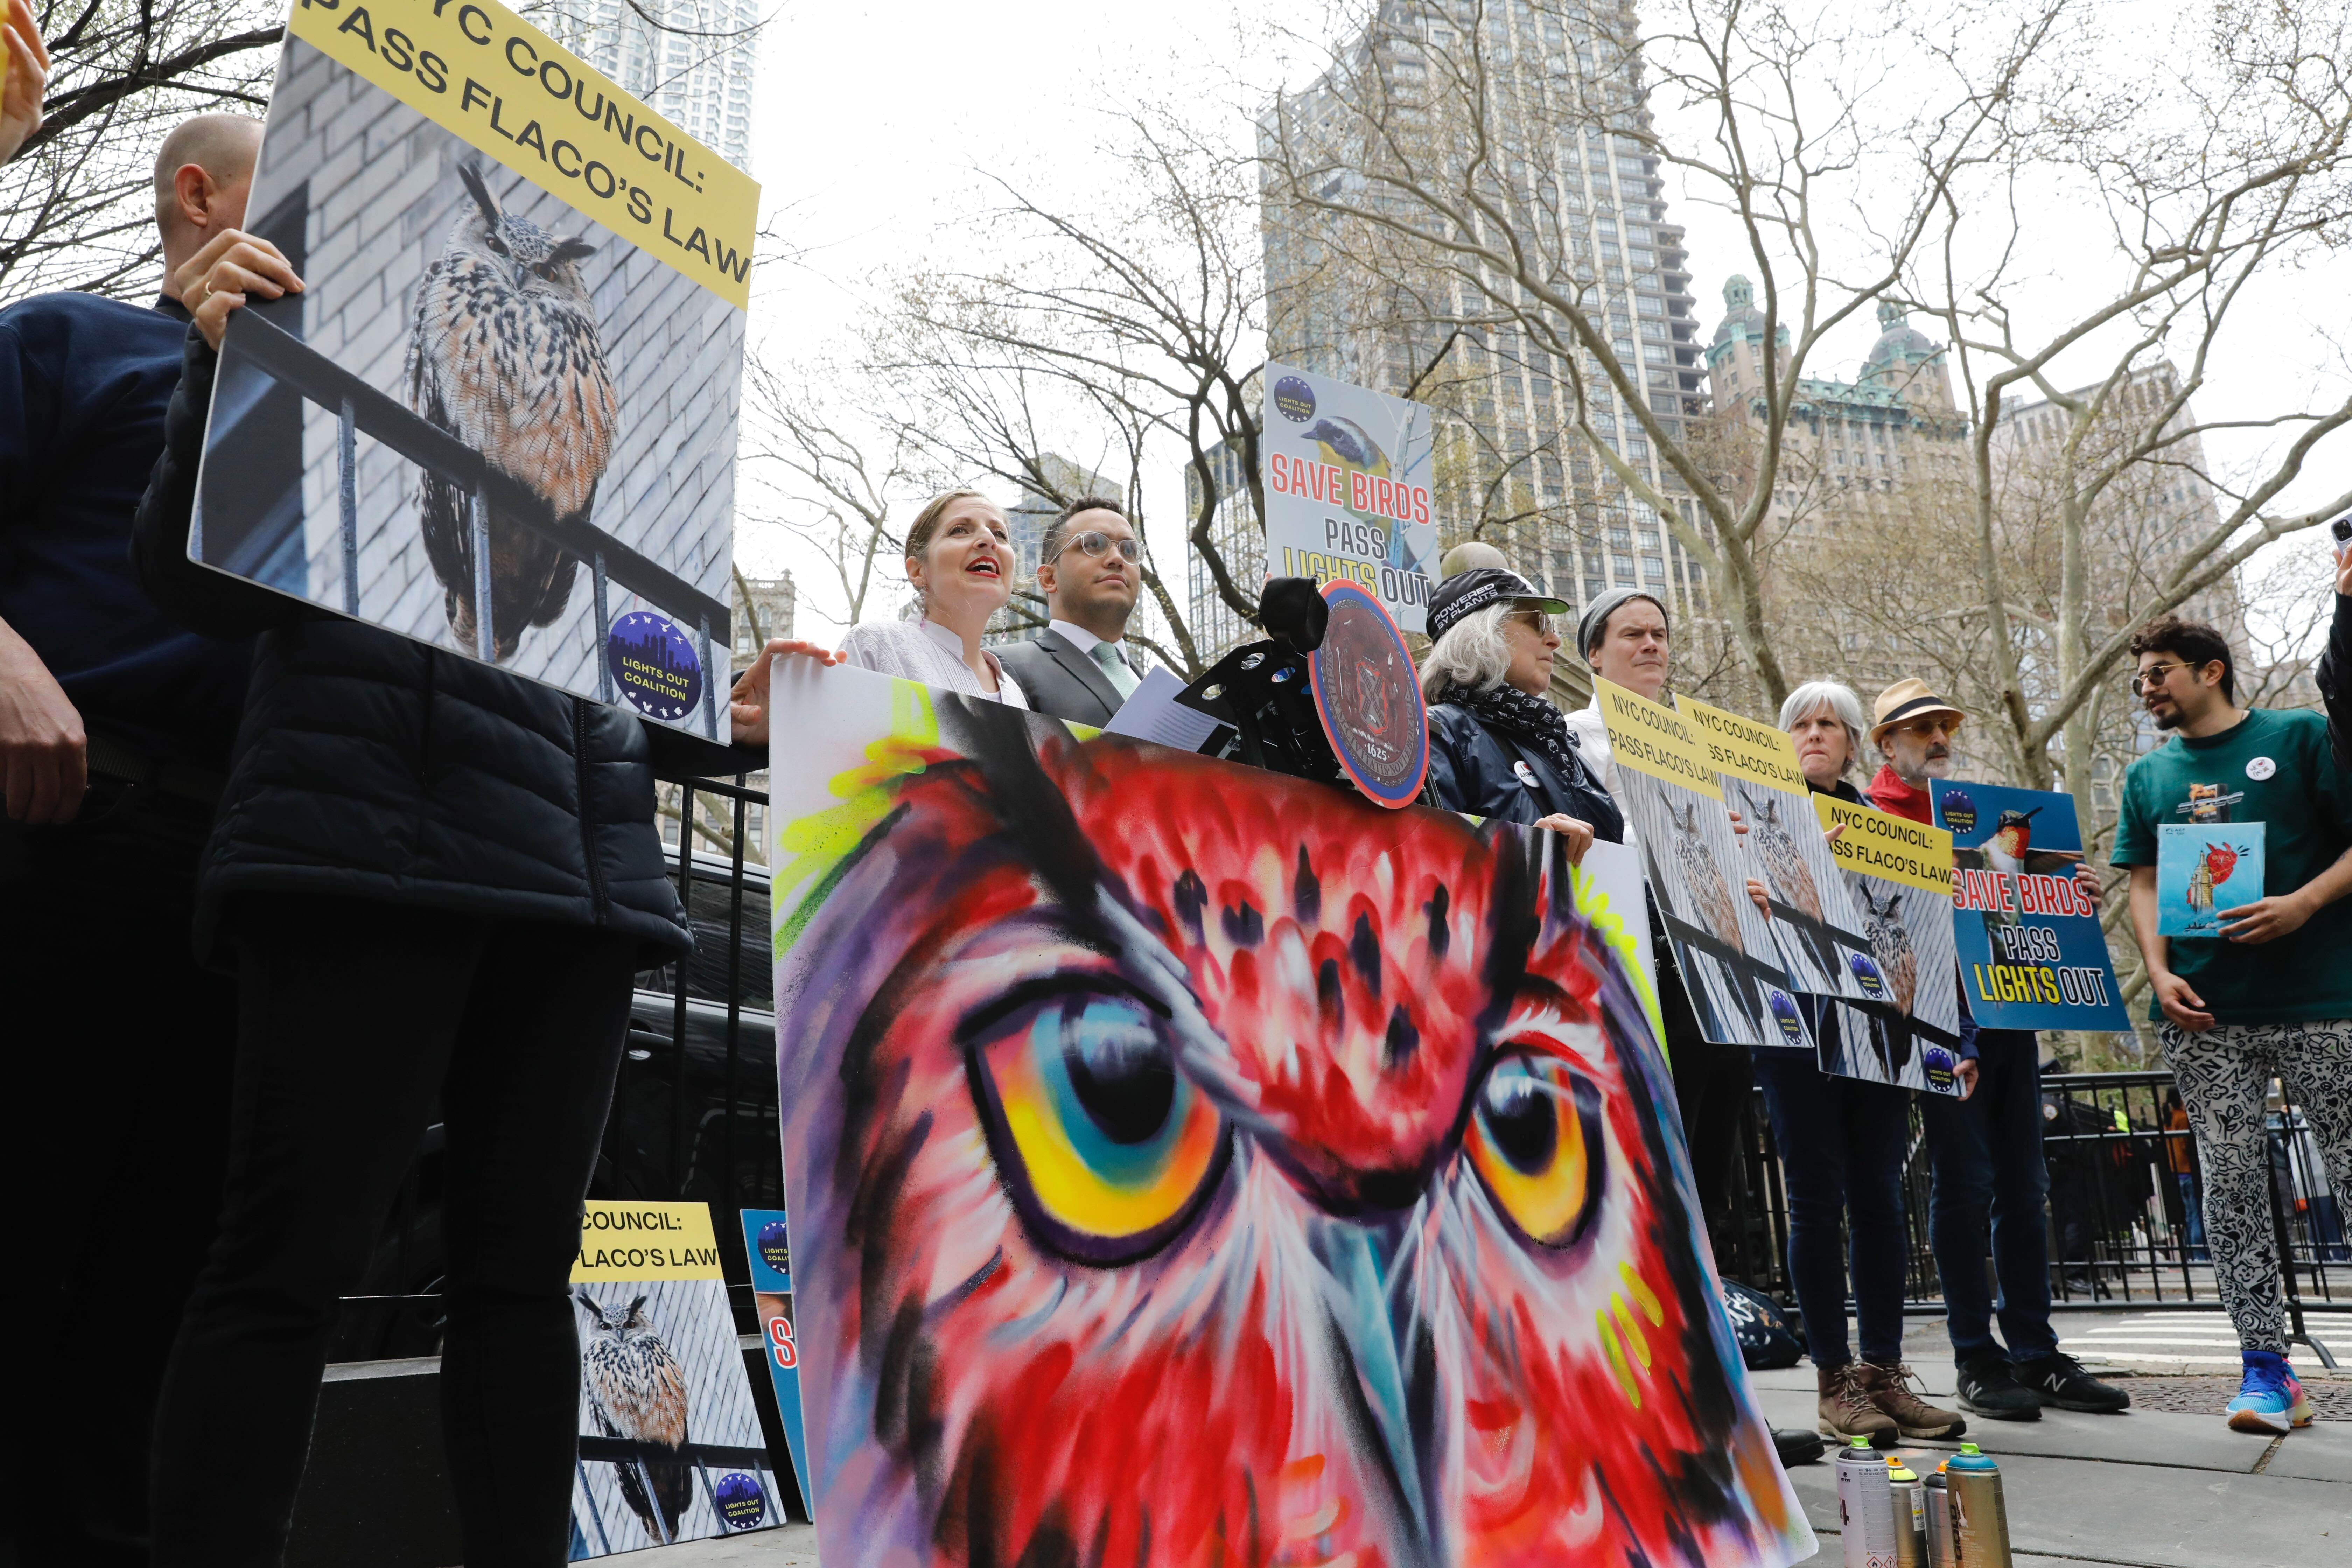 Politicians speak at an outdoor press conference alongside activists holding paintings of an owl.